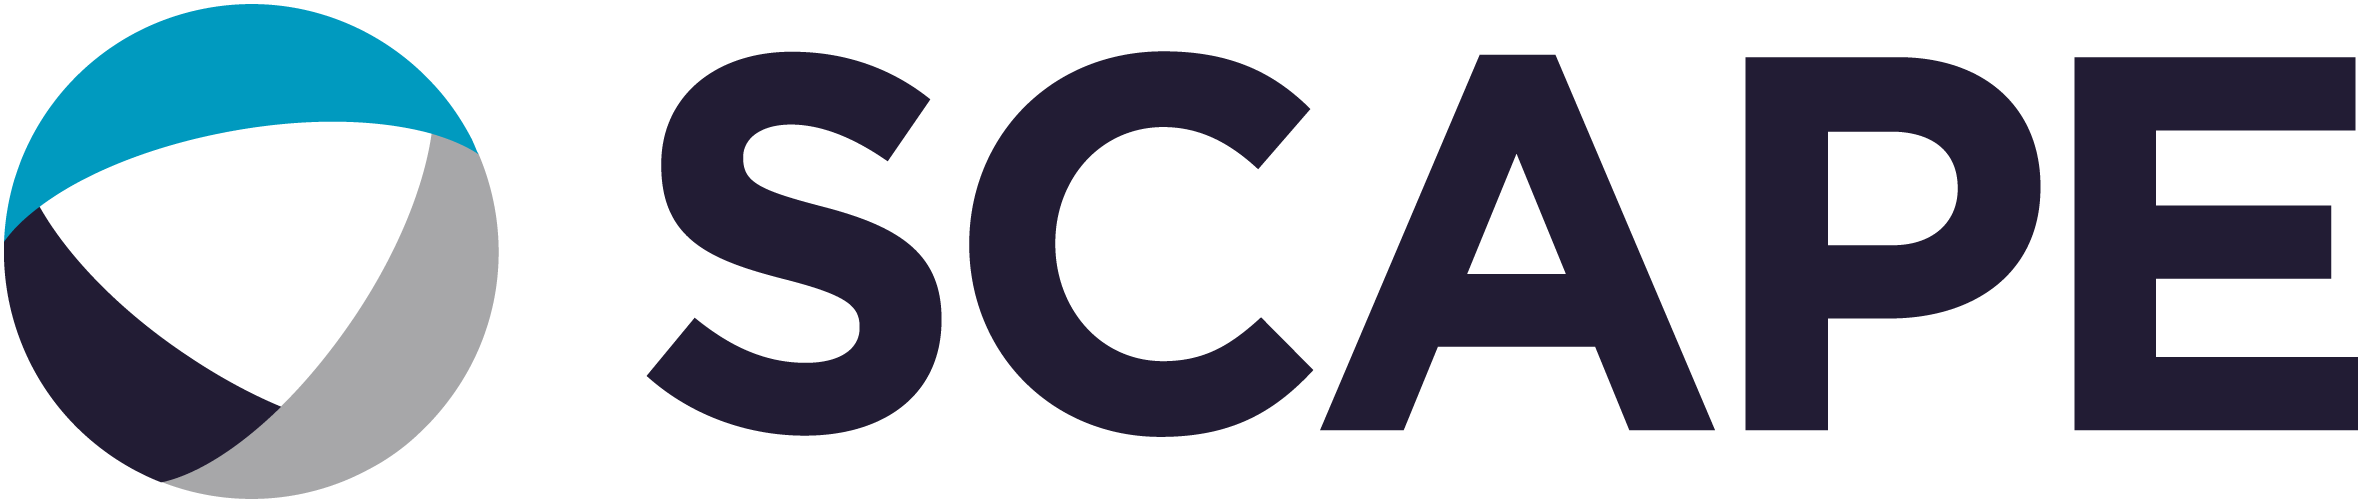 logo for Scape